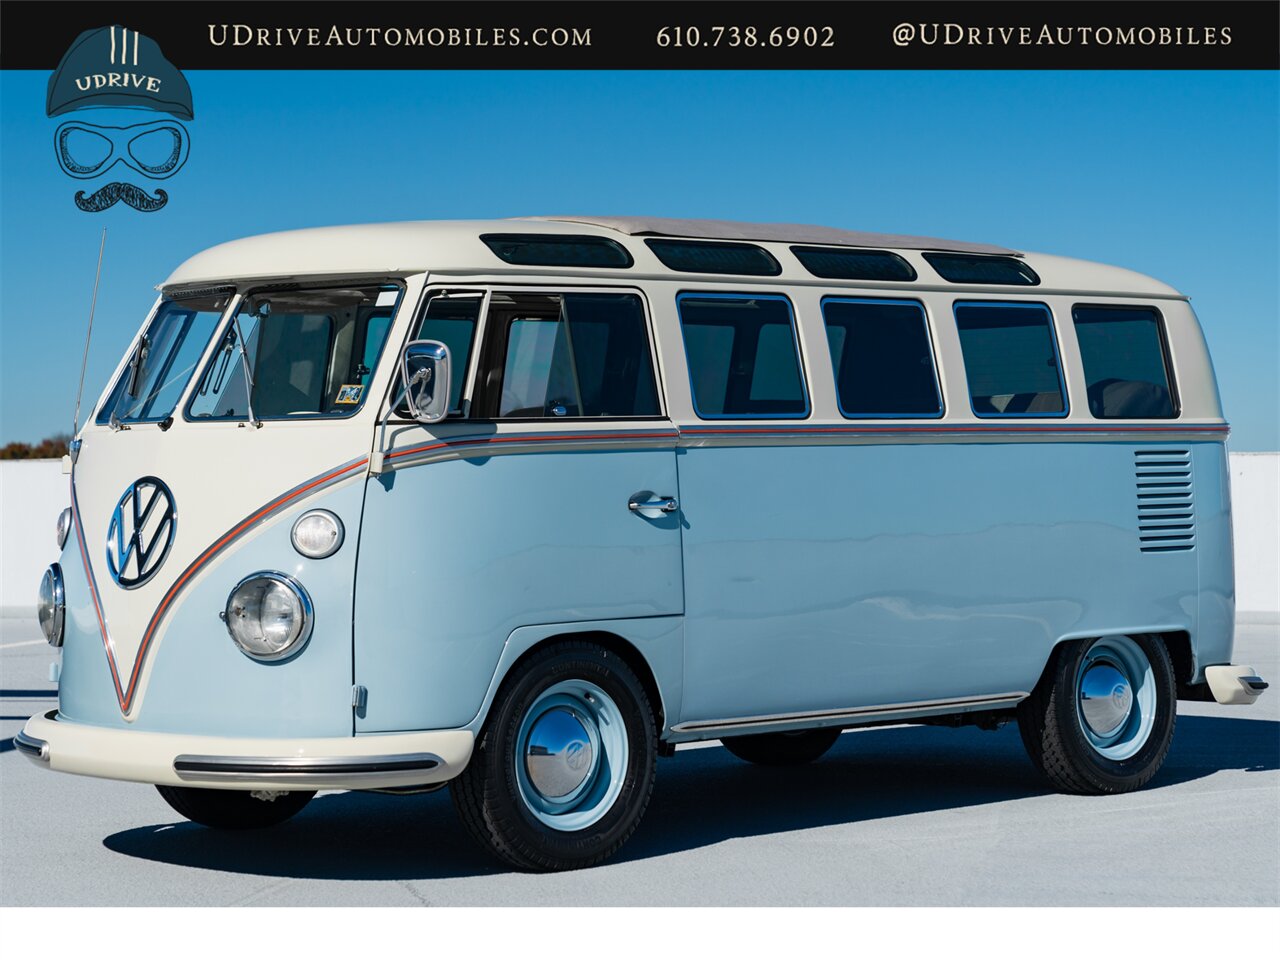 1965 Volkswagen Bus/Vanagon 21 Window Deluxe Transporter  Built By East Coast VW Restorations 1914cc A/C - Photo 12 - West Chester, PA 19382